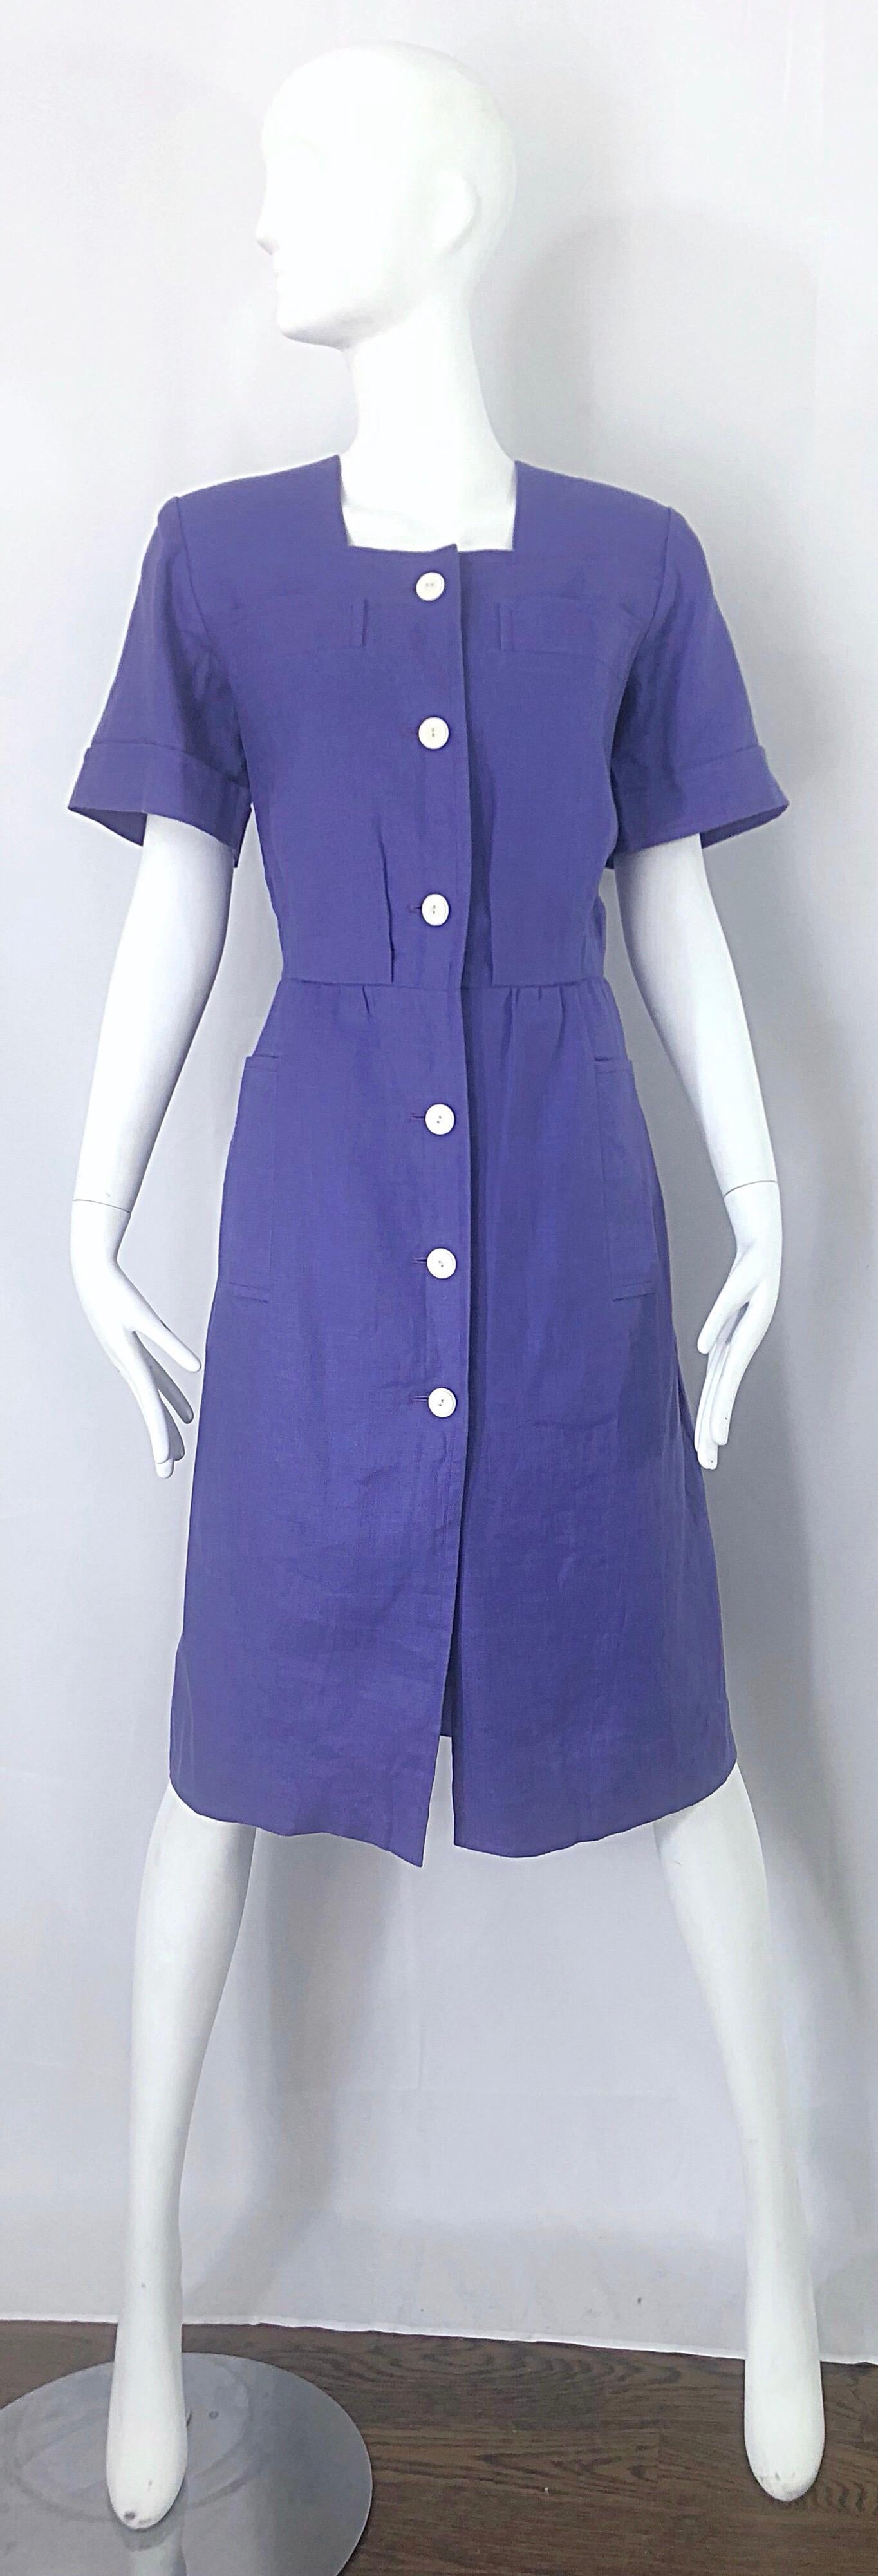 Chic vintage YVES SAINT LAURENT Rive Gauche light lilac lavender purple linen short sleeve shirt dress! Features luxurious soft Irish linen, with pockets at each breast and at each side of the waist. Wonderful fit that is truly flattering to the